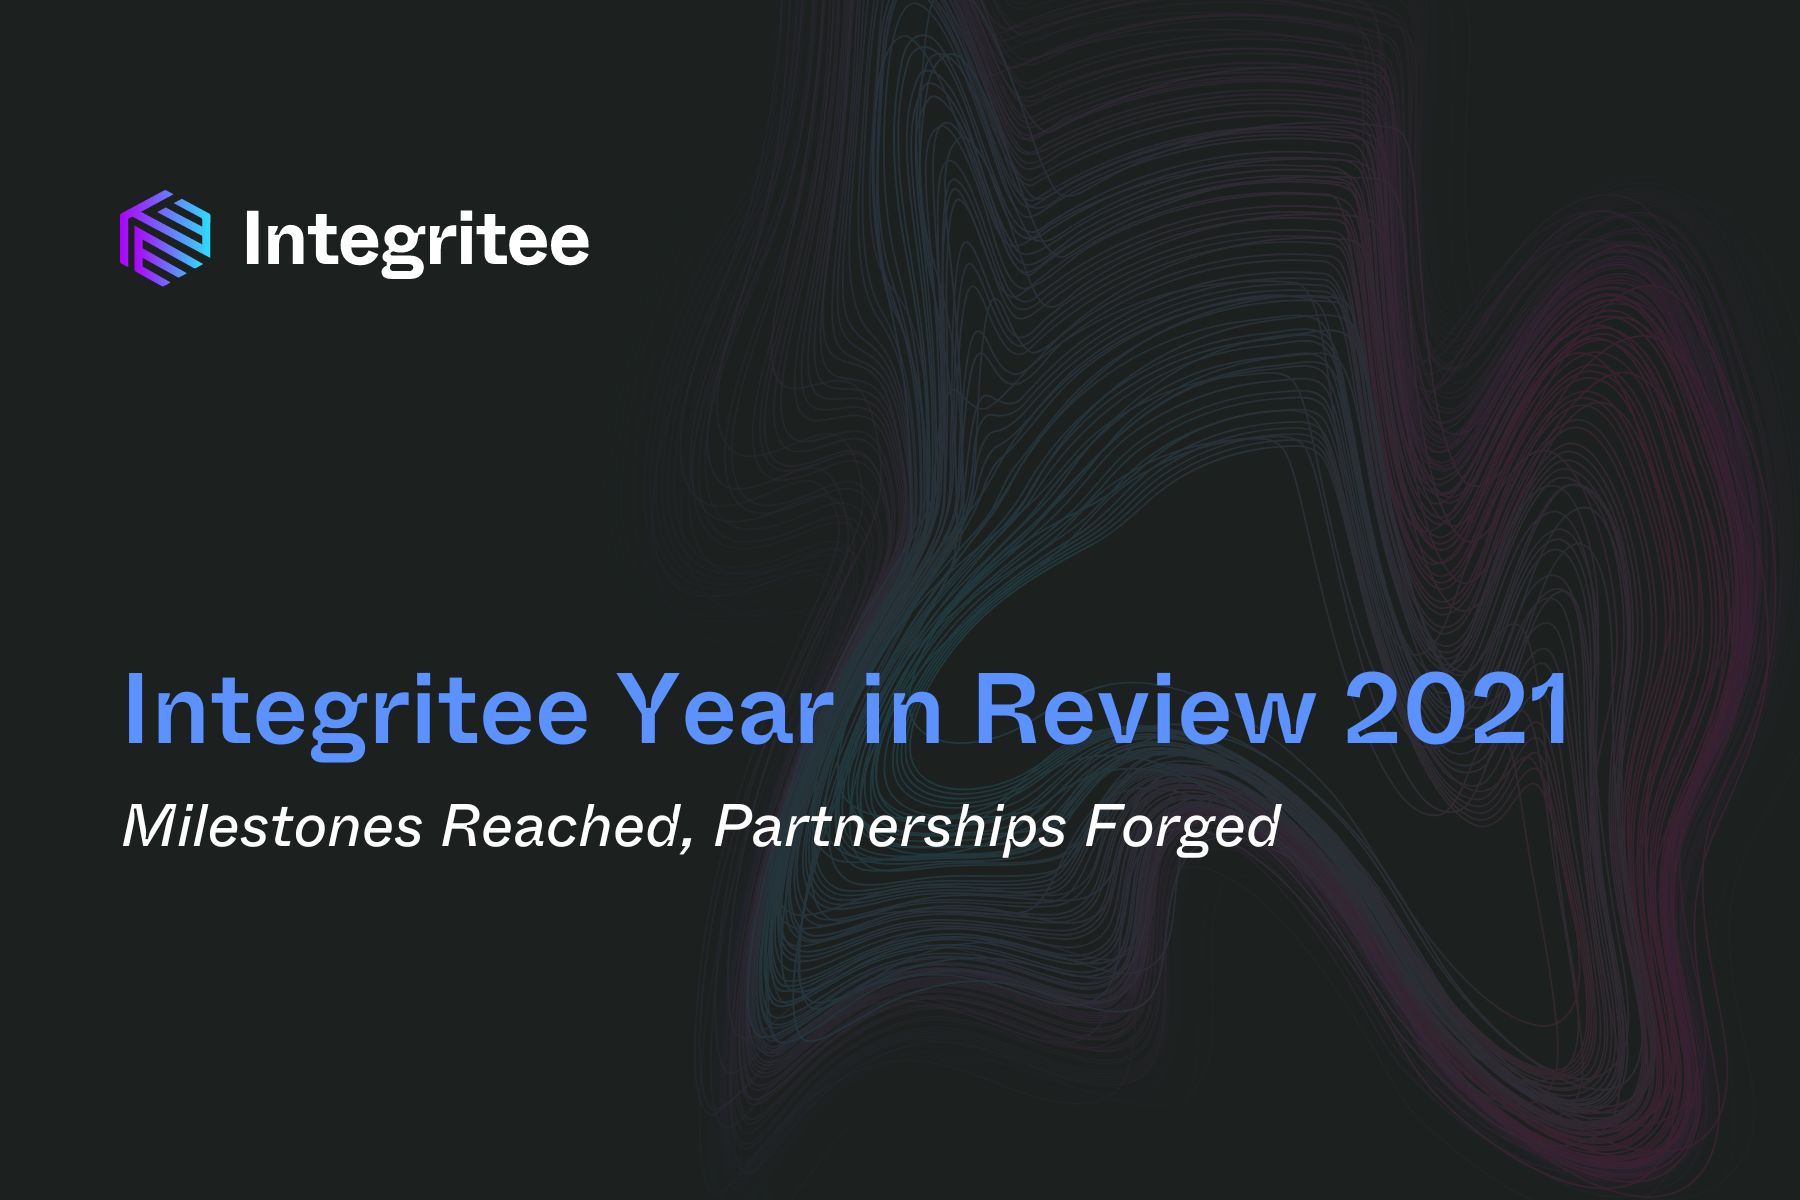 Integritee Year in Review 2021: Milestones Reached, Partnerships Forged